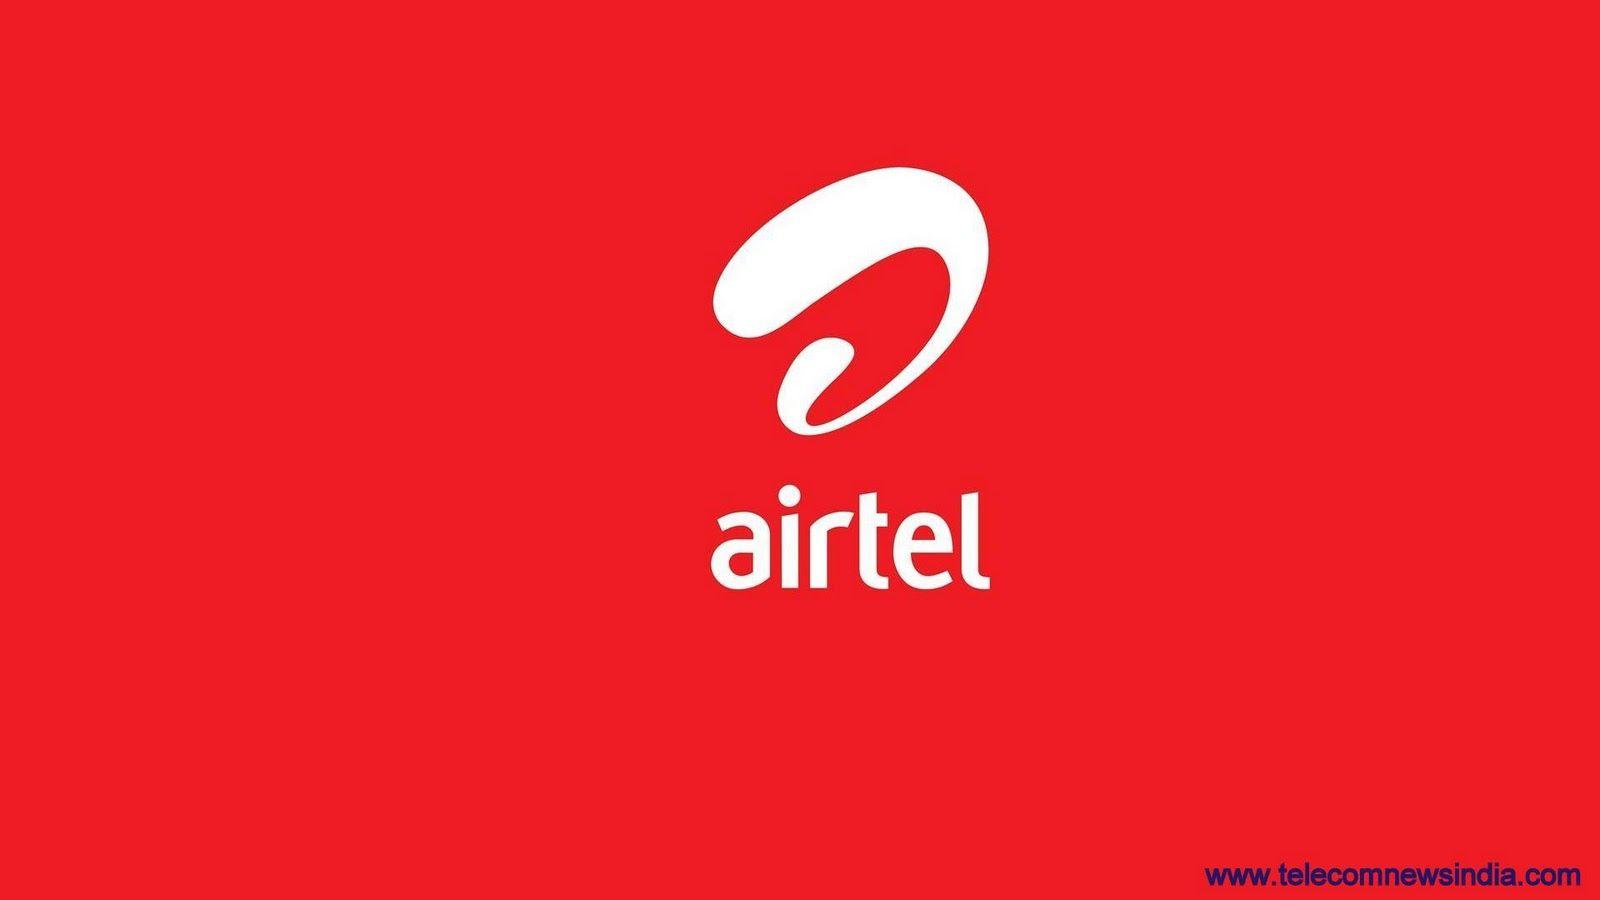 Noah¹s Ark wins gold for Airtel campaign